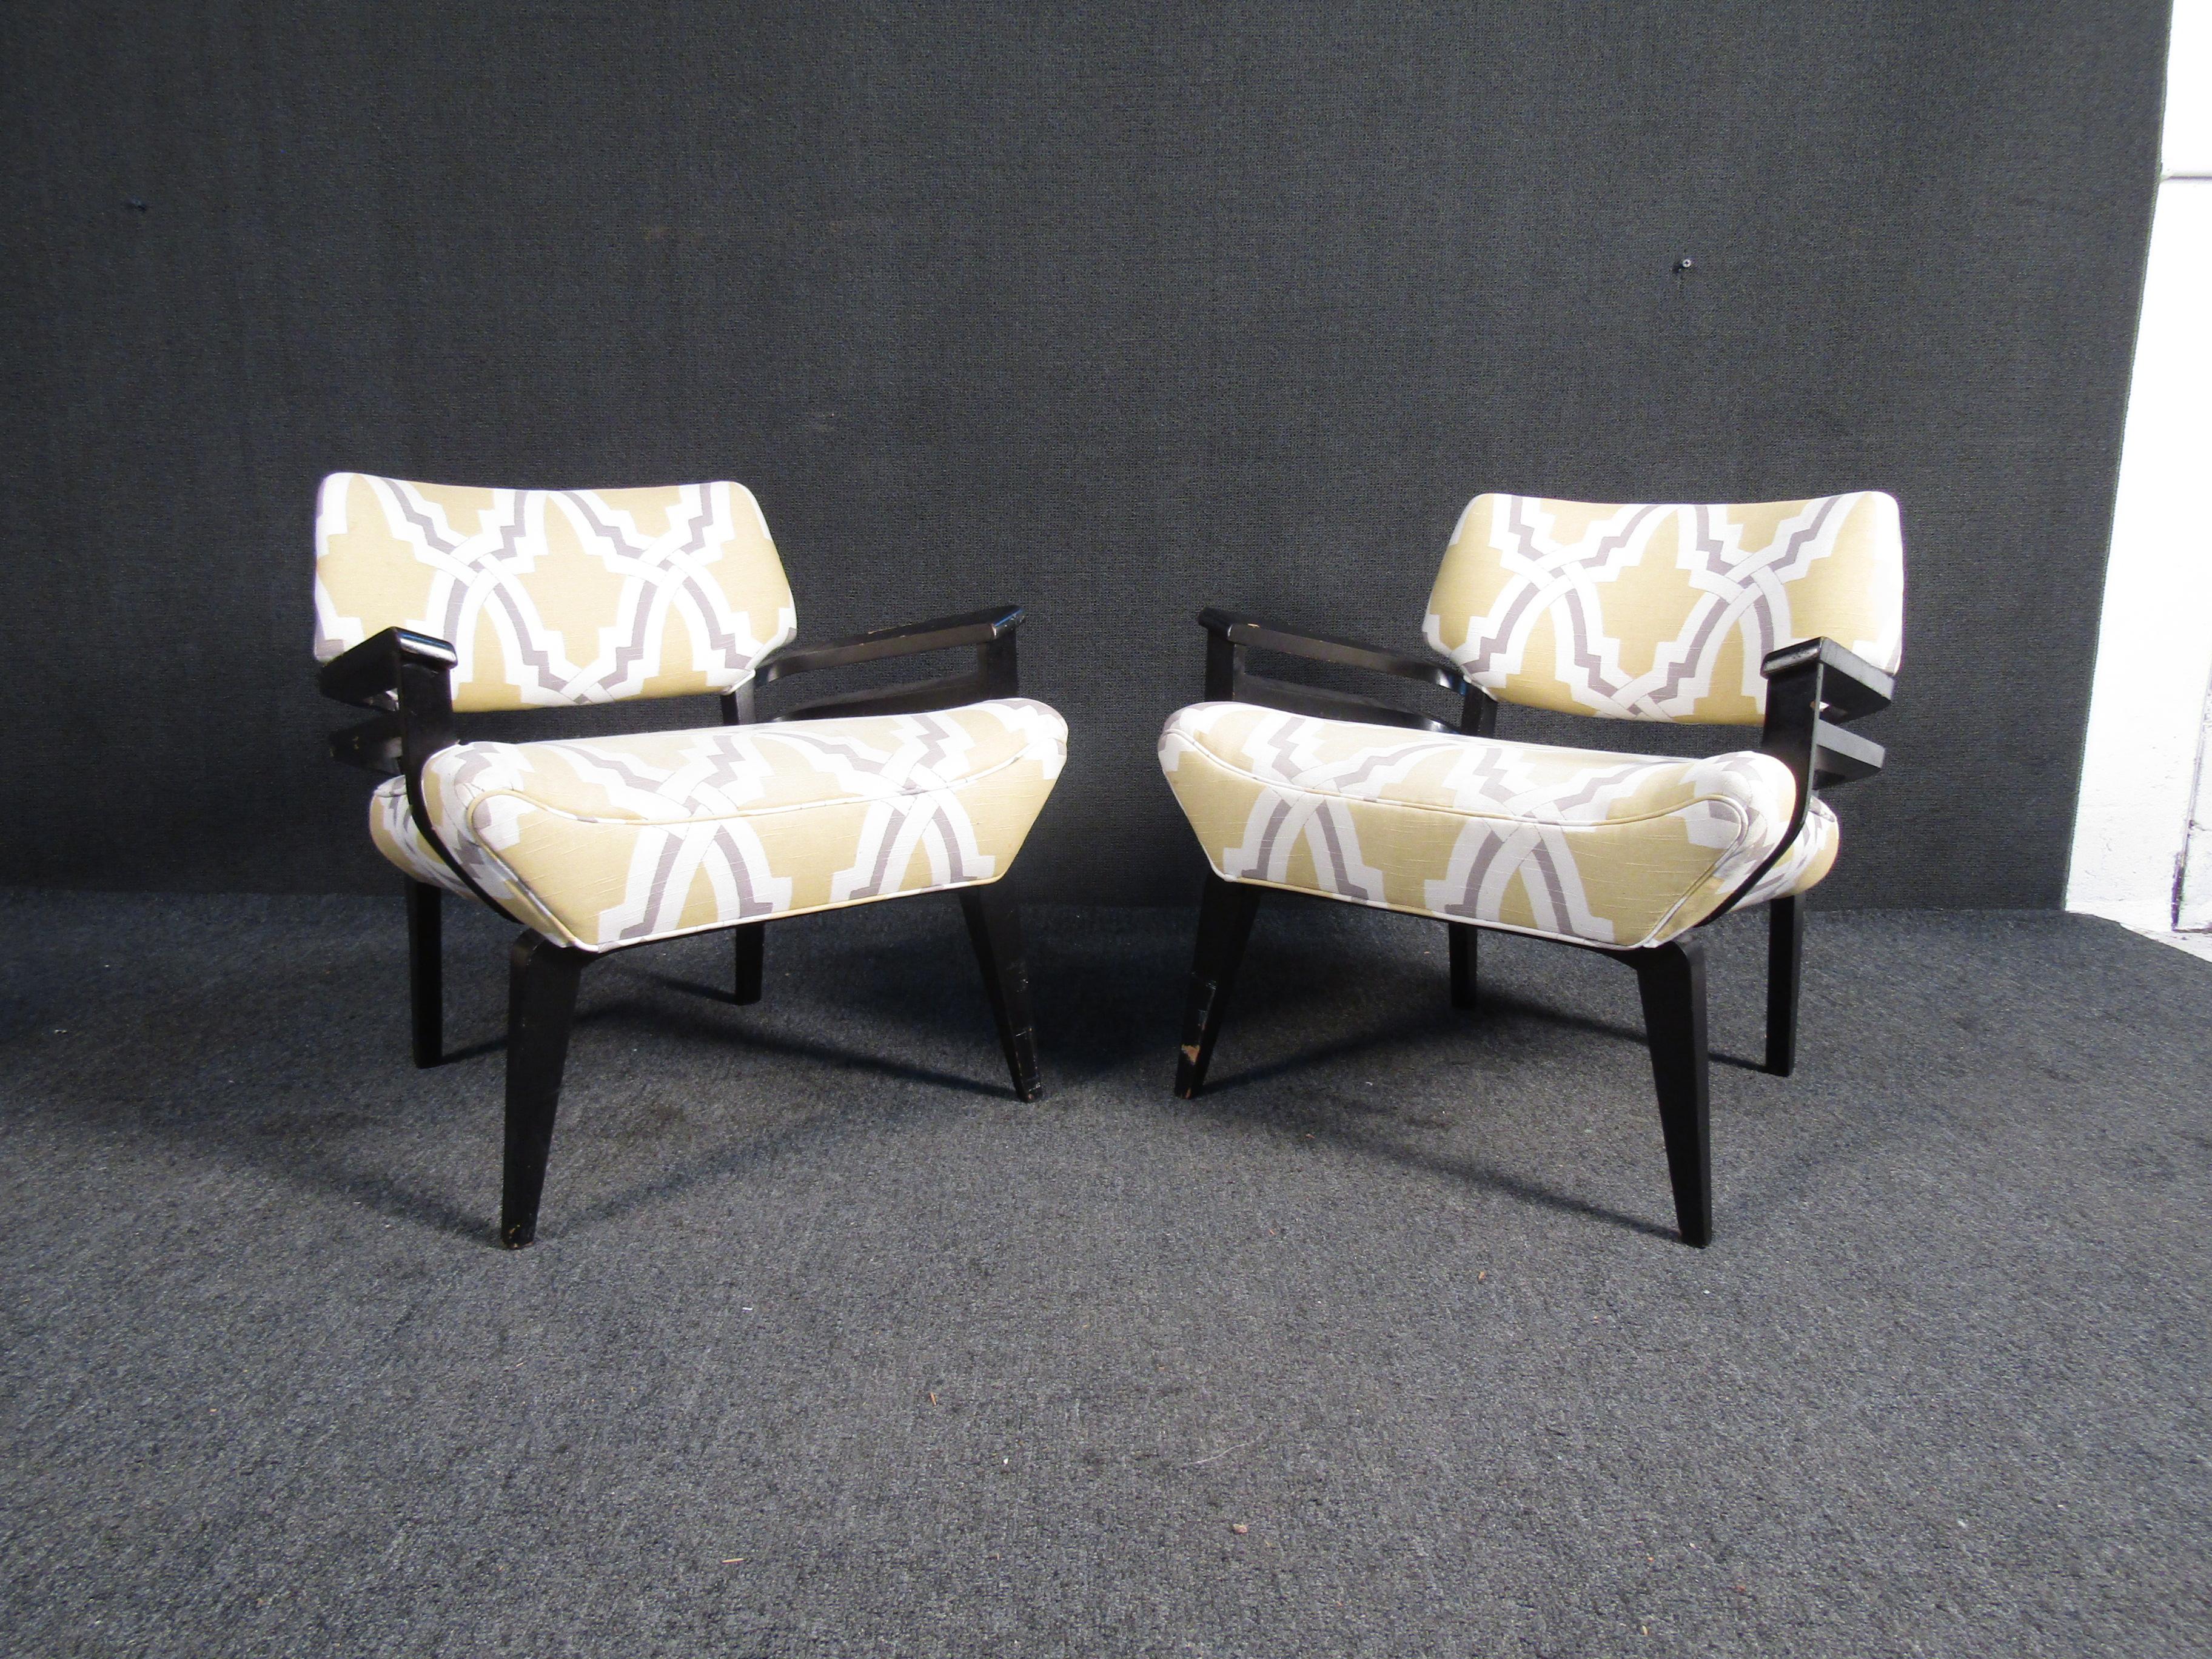 This elegant pair of vintage modern Italian lounge chairs feature thick padded seating and a black lacquered frame. A sleek and comfortable low sitting design that has splayed tapered legs. This stylish Italian modern pair of lounge chairs are sure